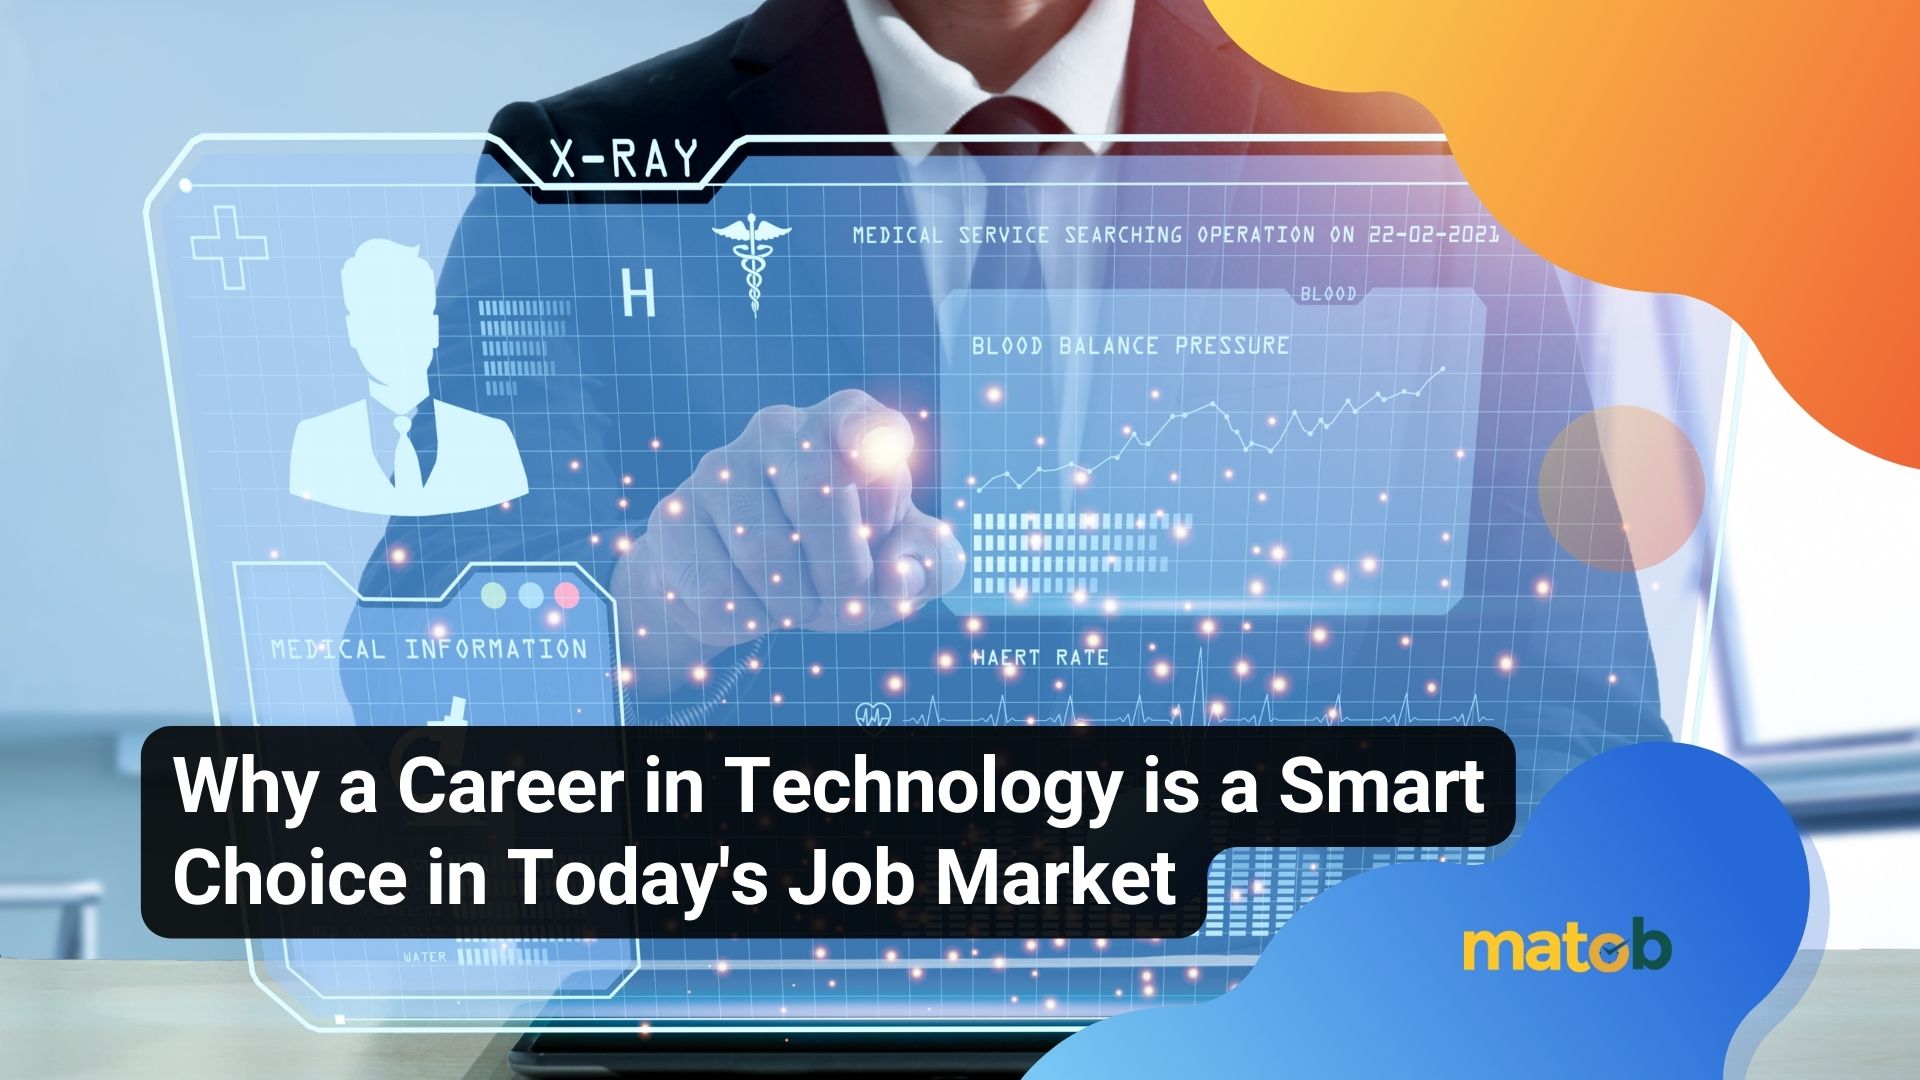 Why a Career in Technology is a Smart Choice in Today's Job Market